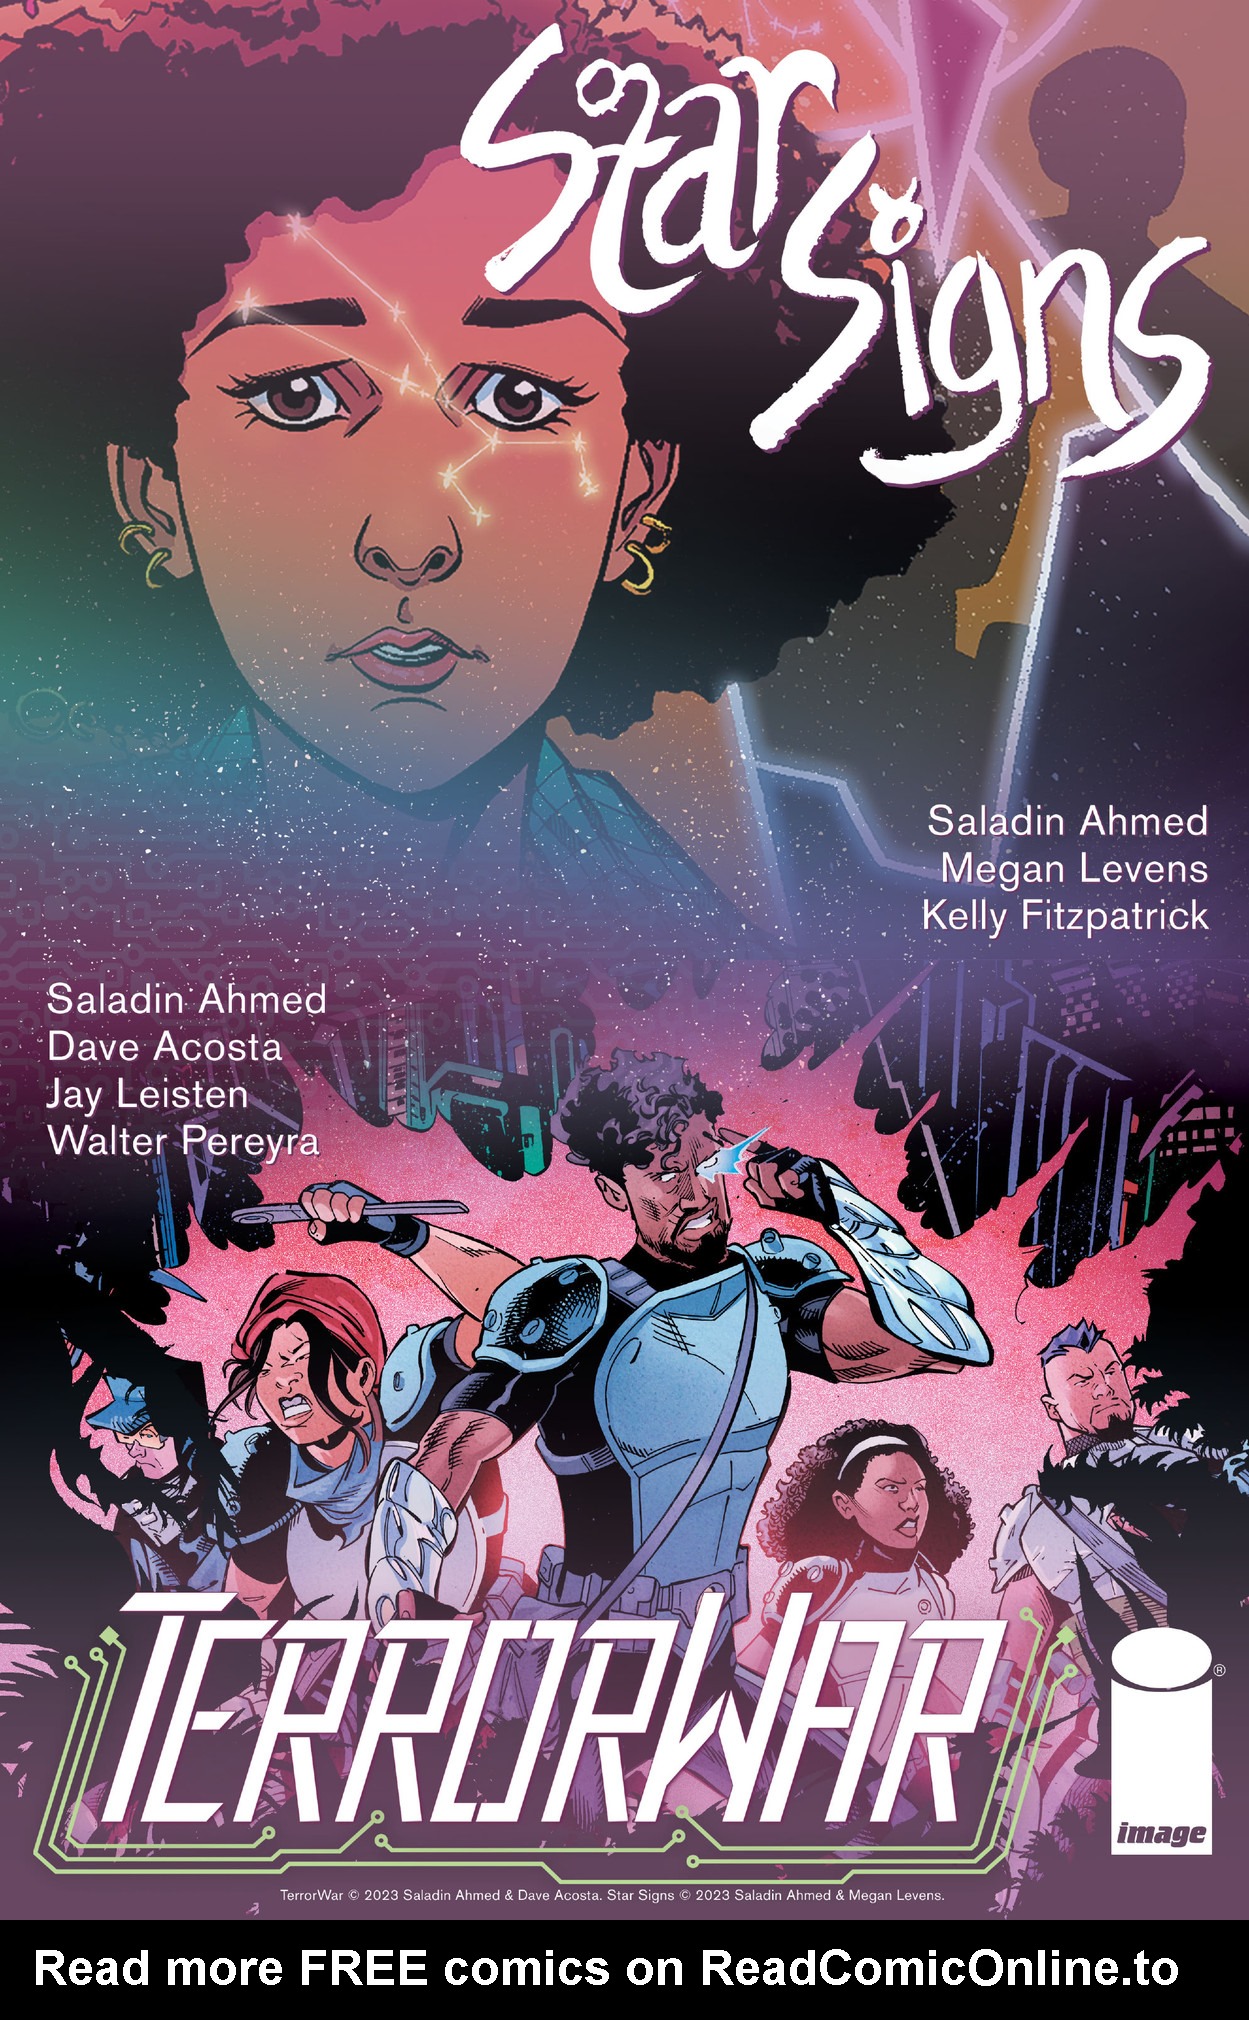 Read online Starsigns comic -  Issue #6 - 31